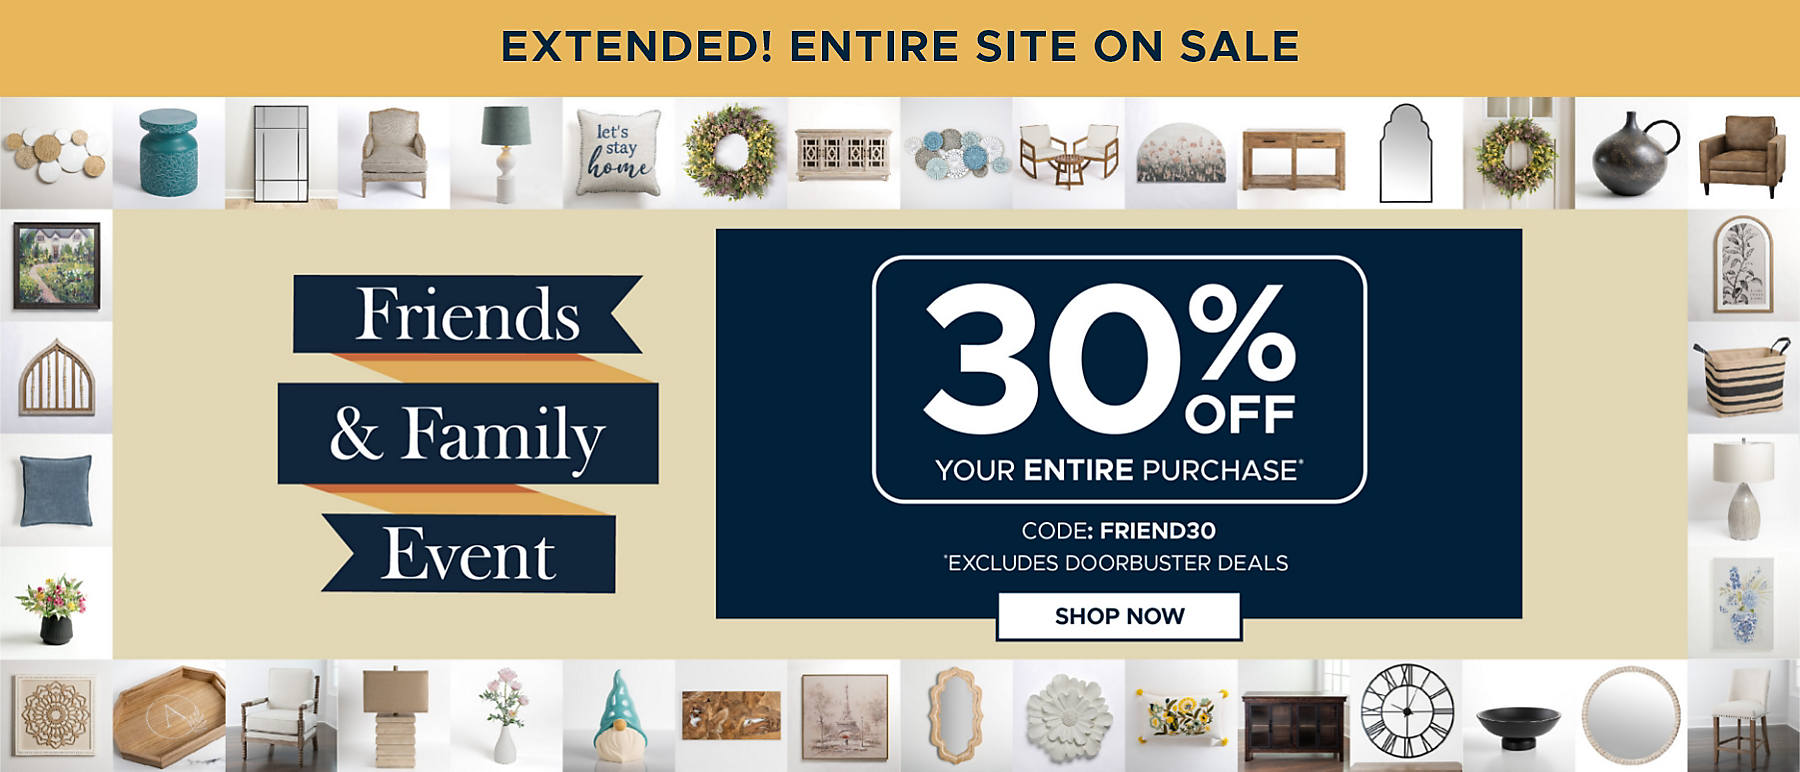 Extended! Entire Site On Sale Friends & Family Event 30% off Your Entire Purchase* code: FRIEND30 Shop Now *Excludes Doorbuster Deals